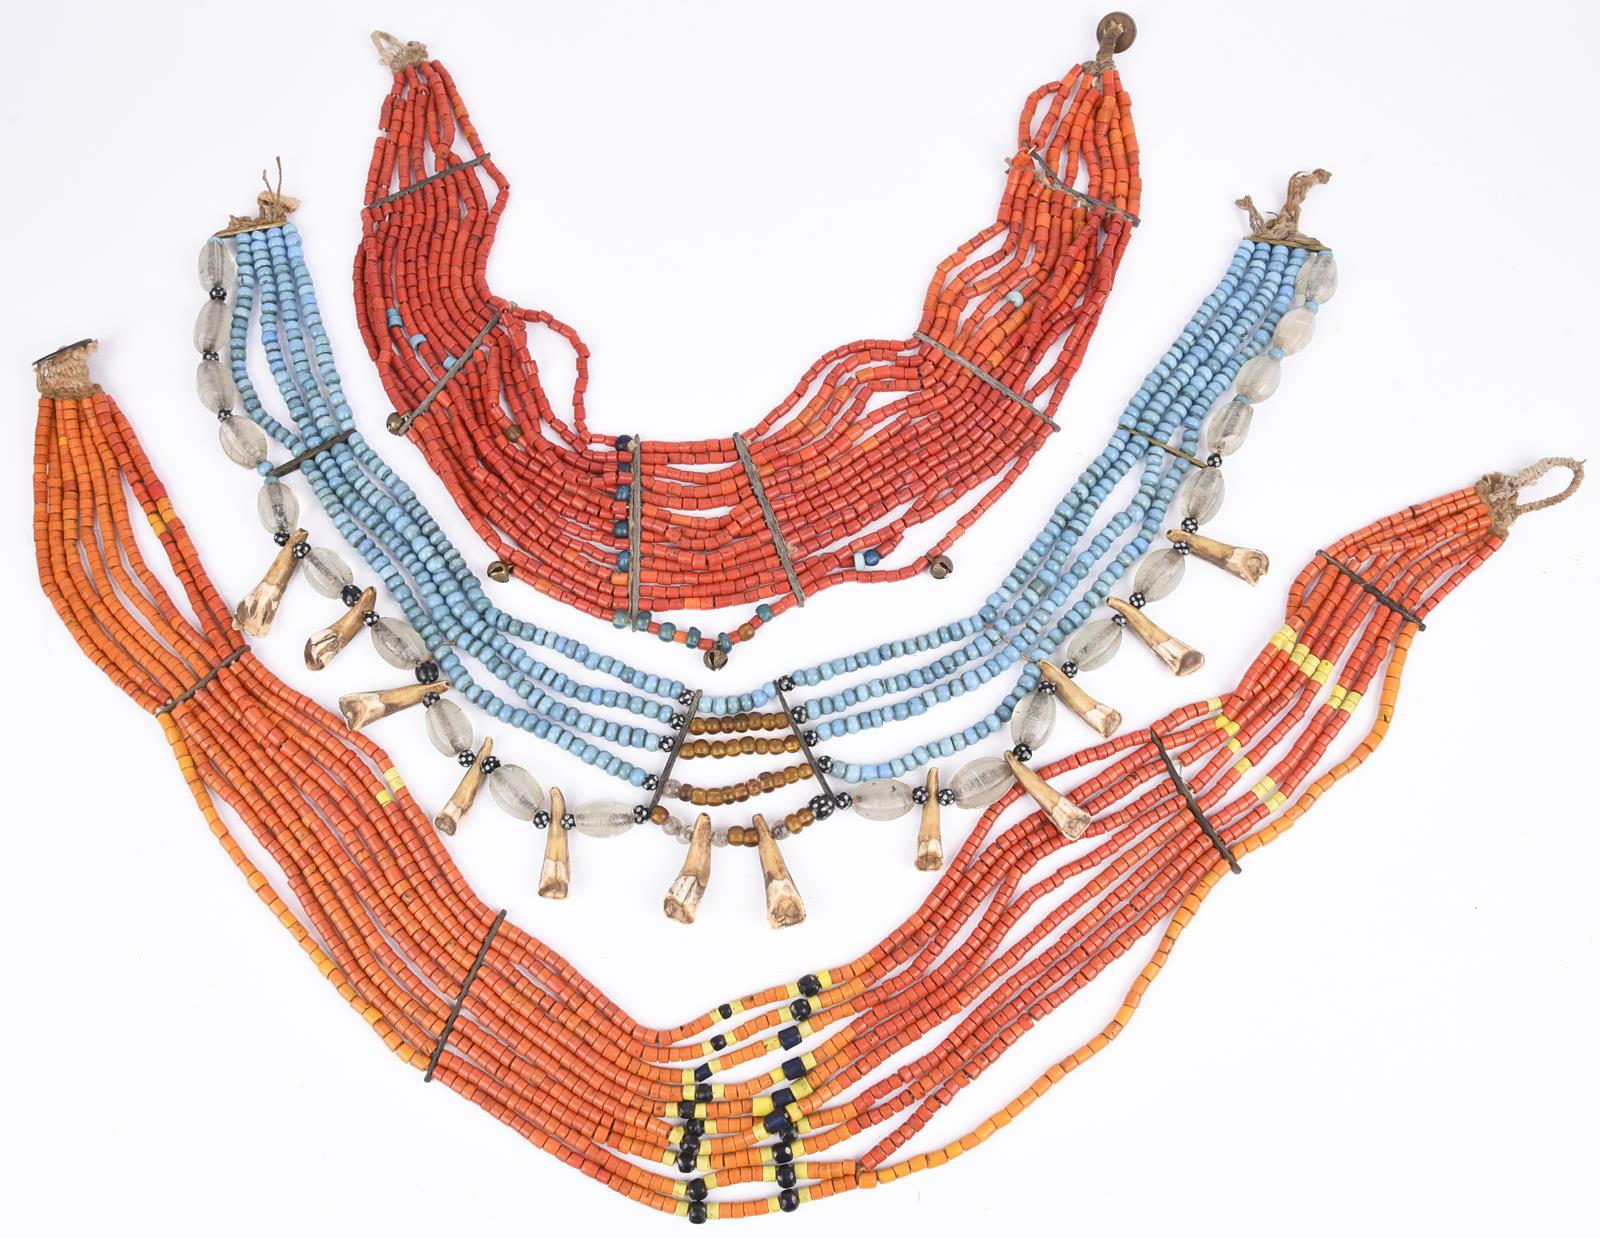 Three Naga necklaces Nagaland coloured and clear glass beads, brass and bone spacers, pig teeth - Image 4 of 6